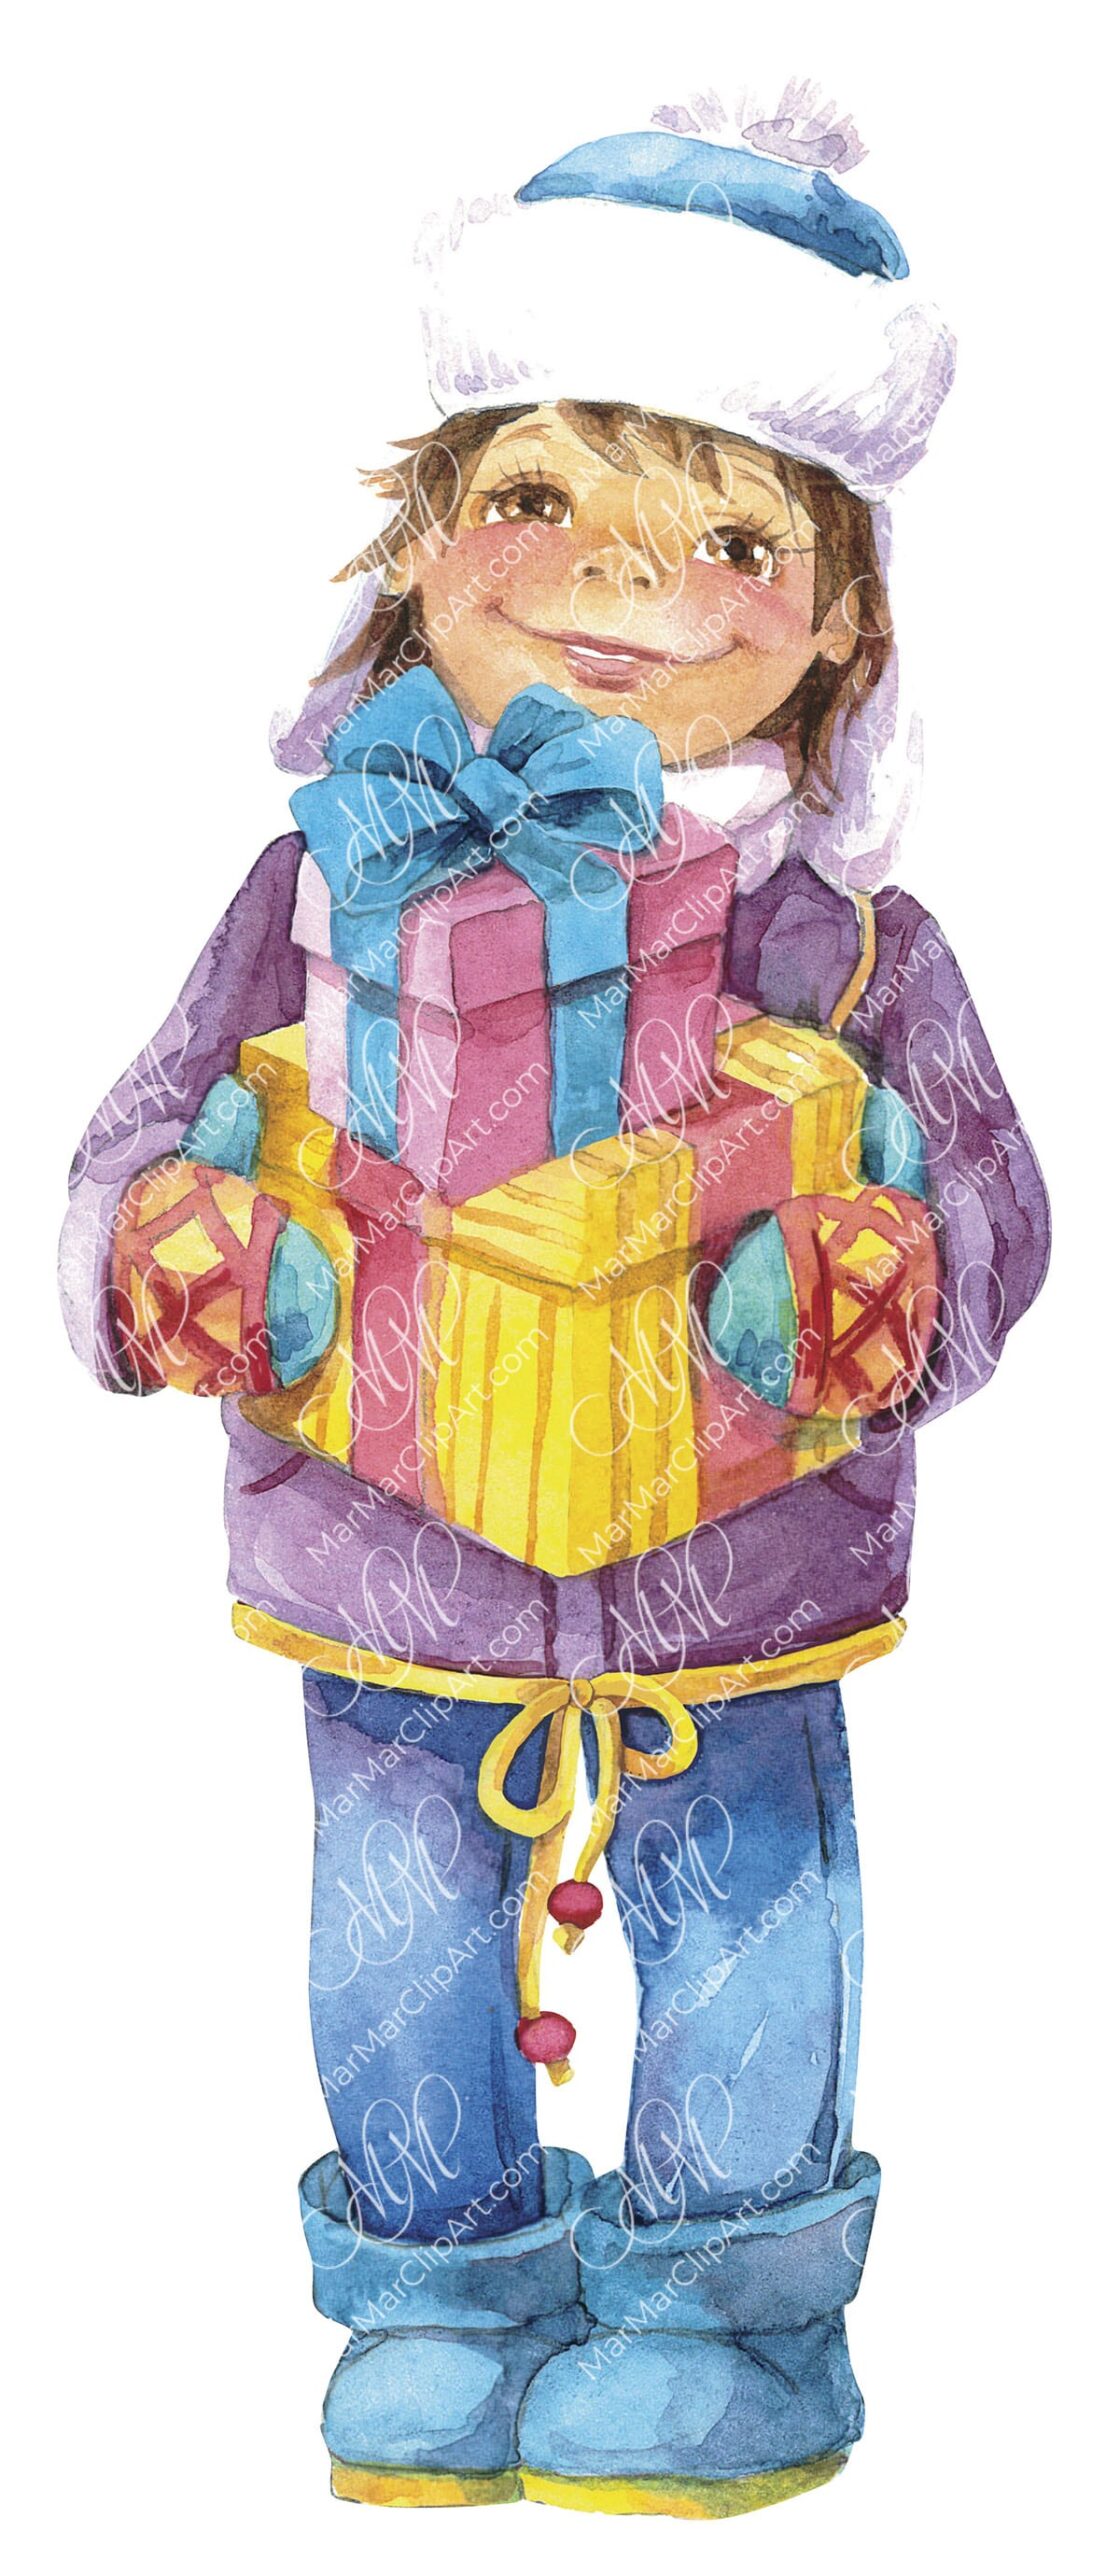 Boy with a gift from Santa. Watercolor hand made illustration, can be used for your cards, invitations, for your design works